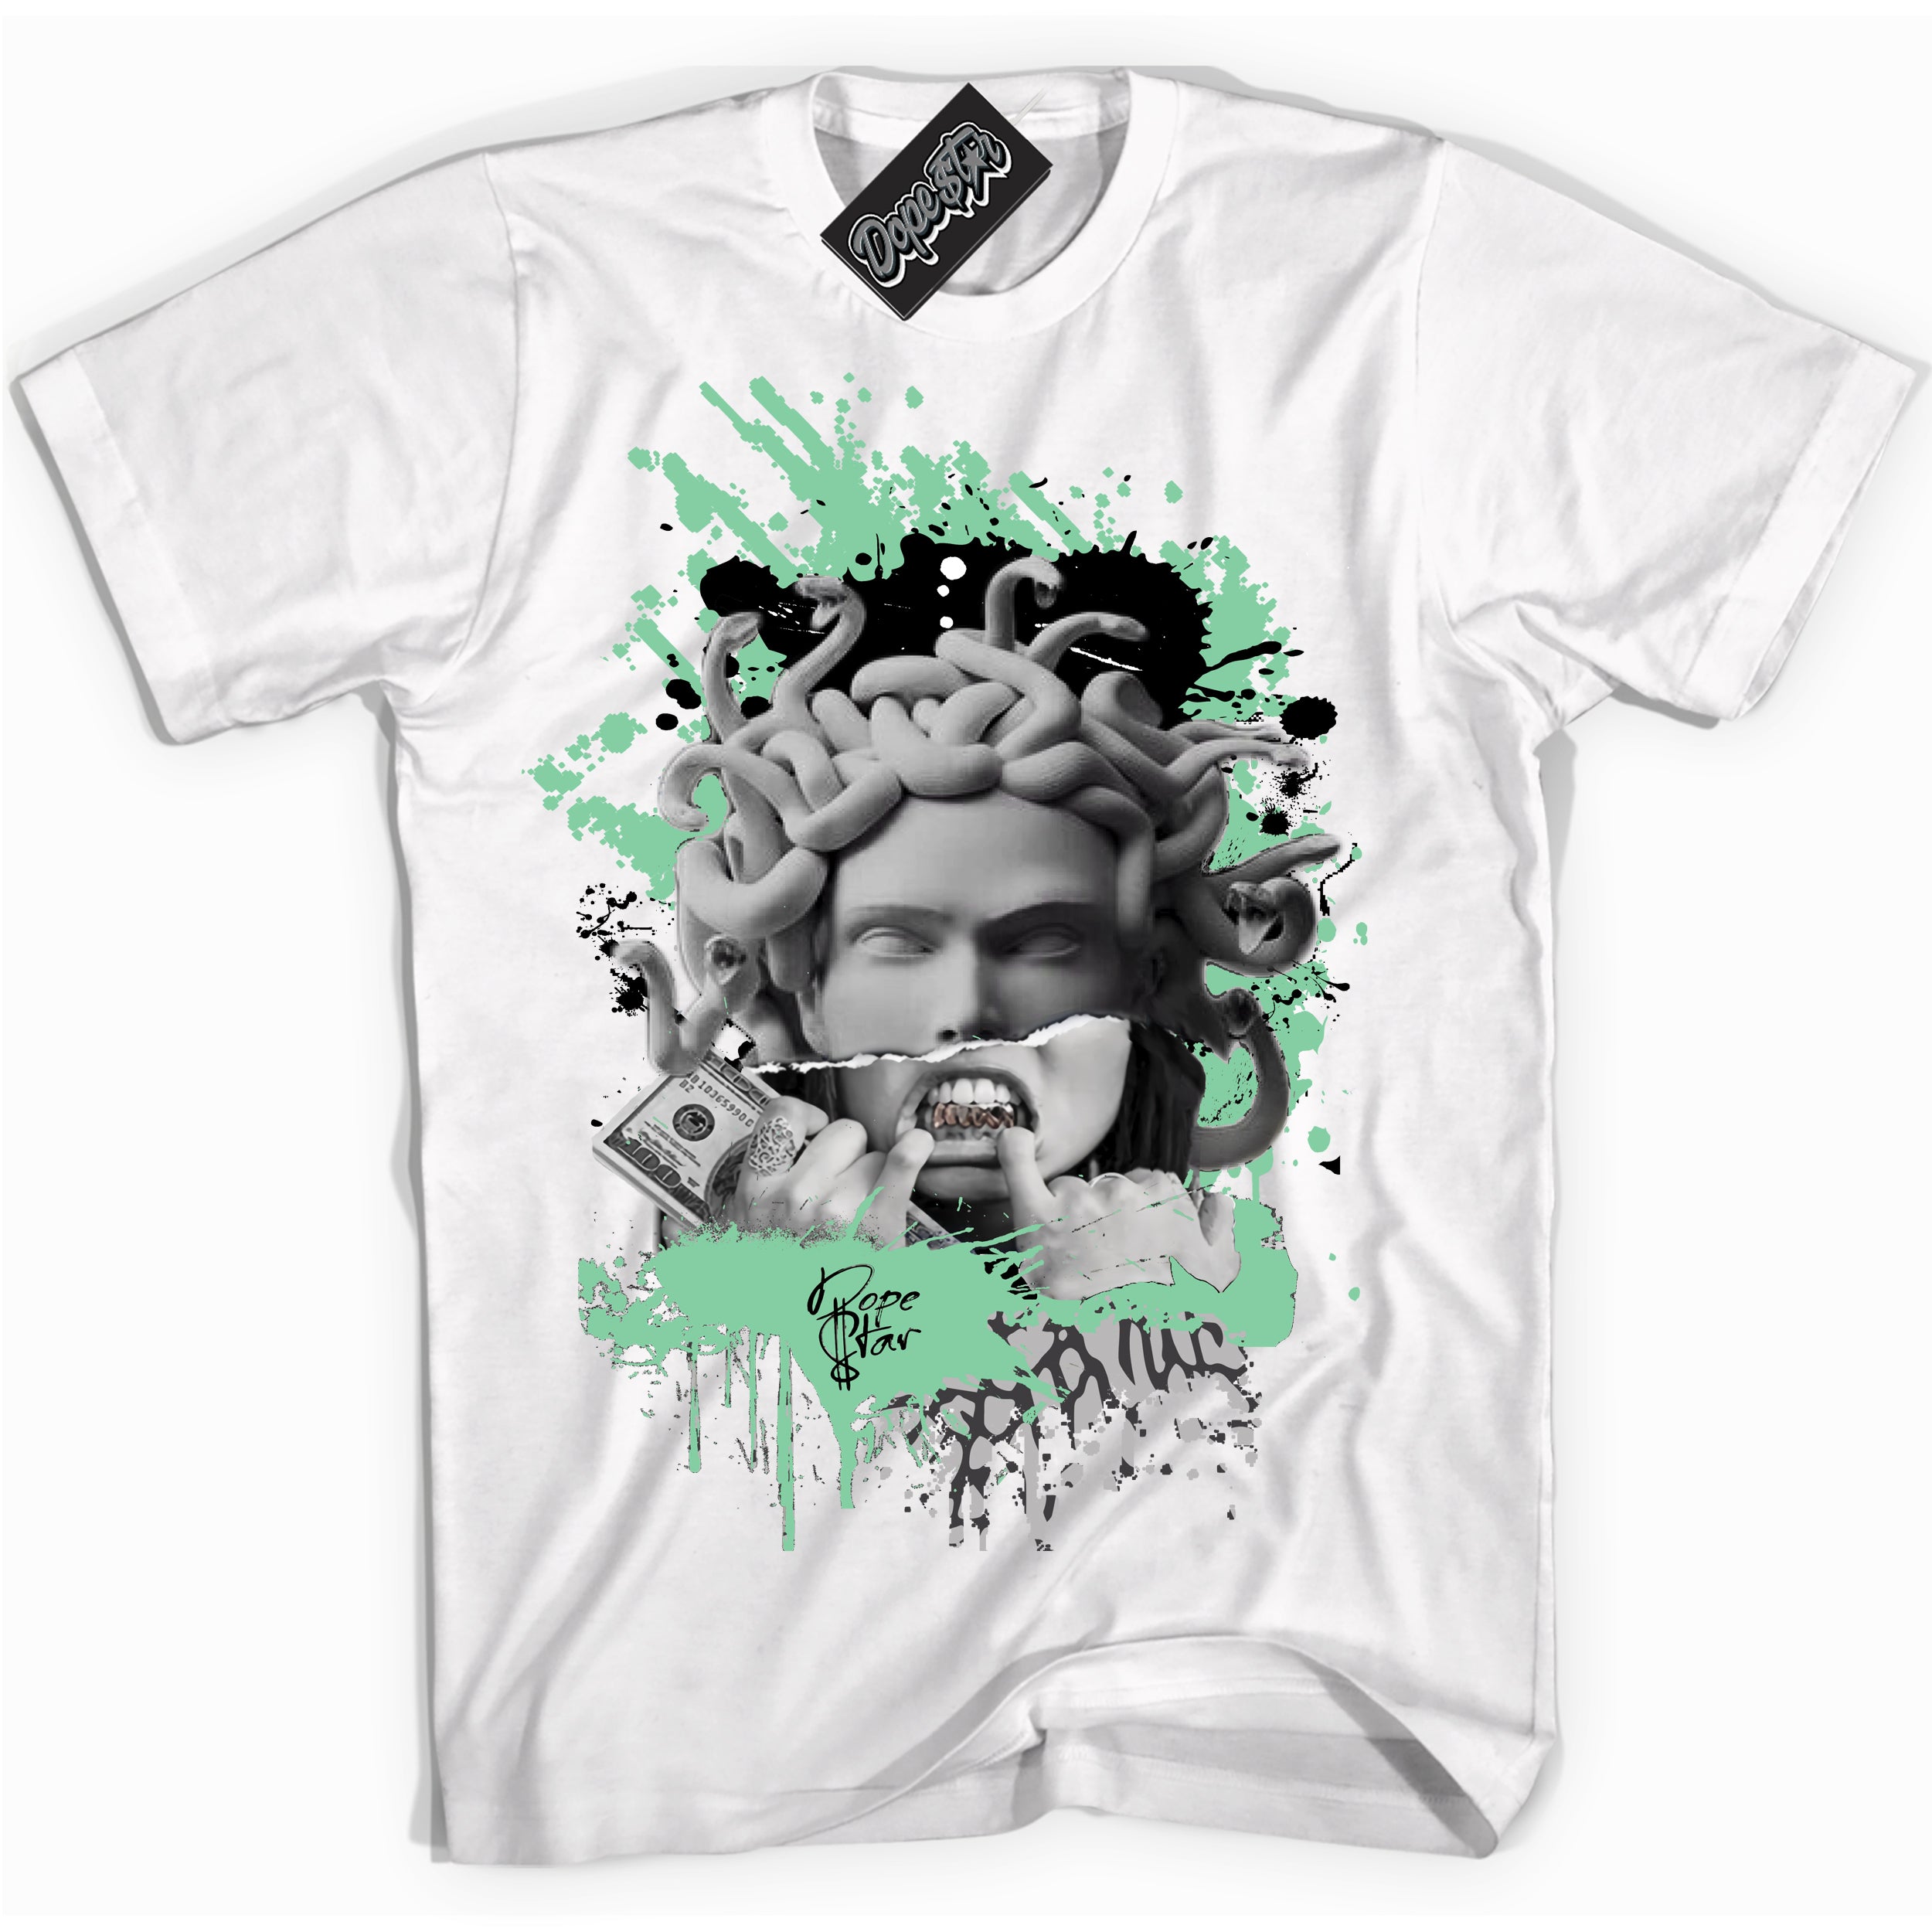 Cool White graphic tee with “ Medusa ” design, that perfectly matches Green Glow 3s sneakers 